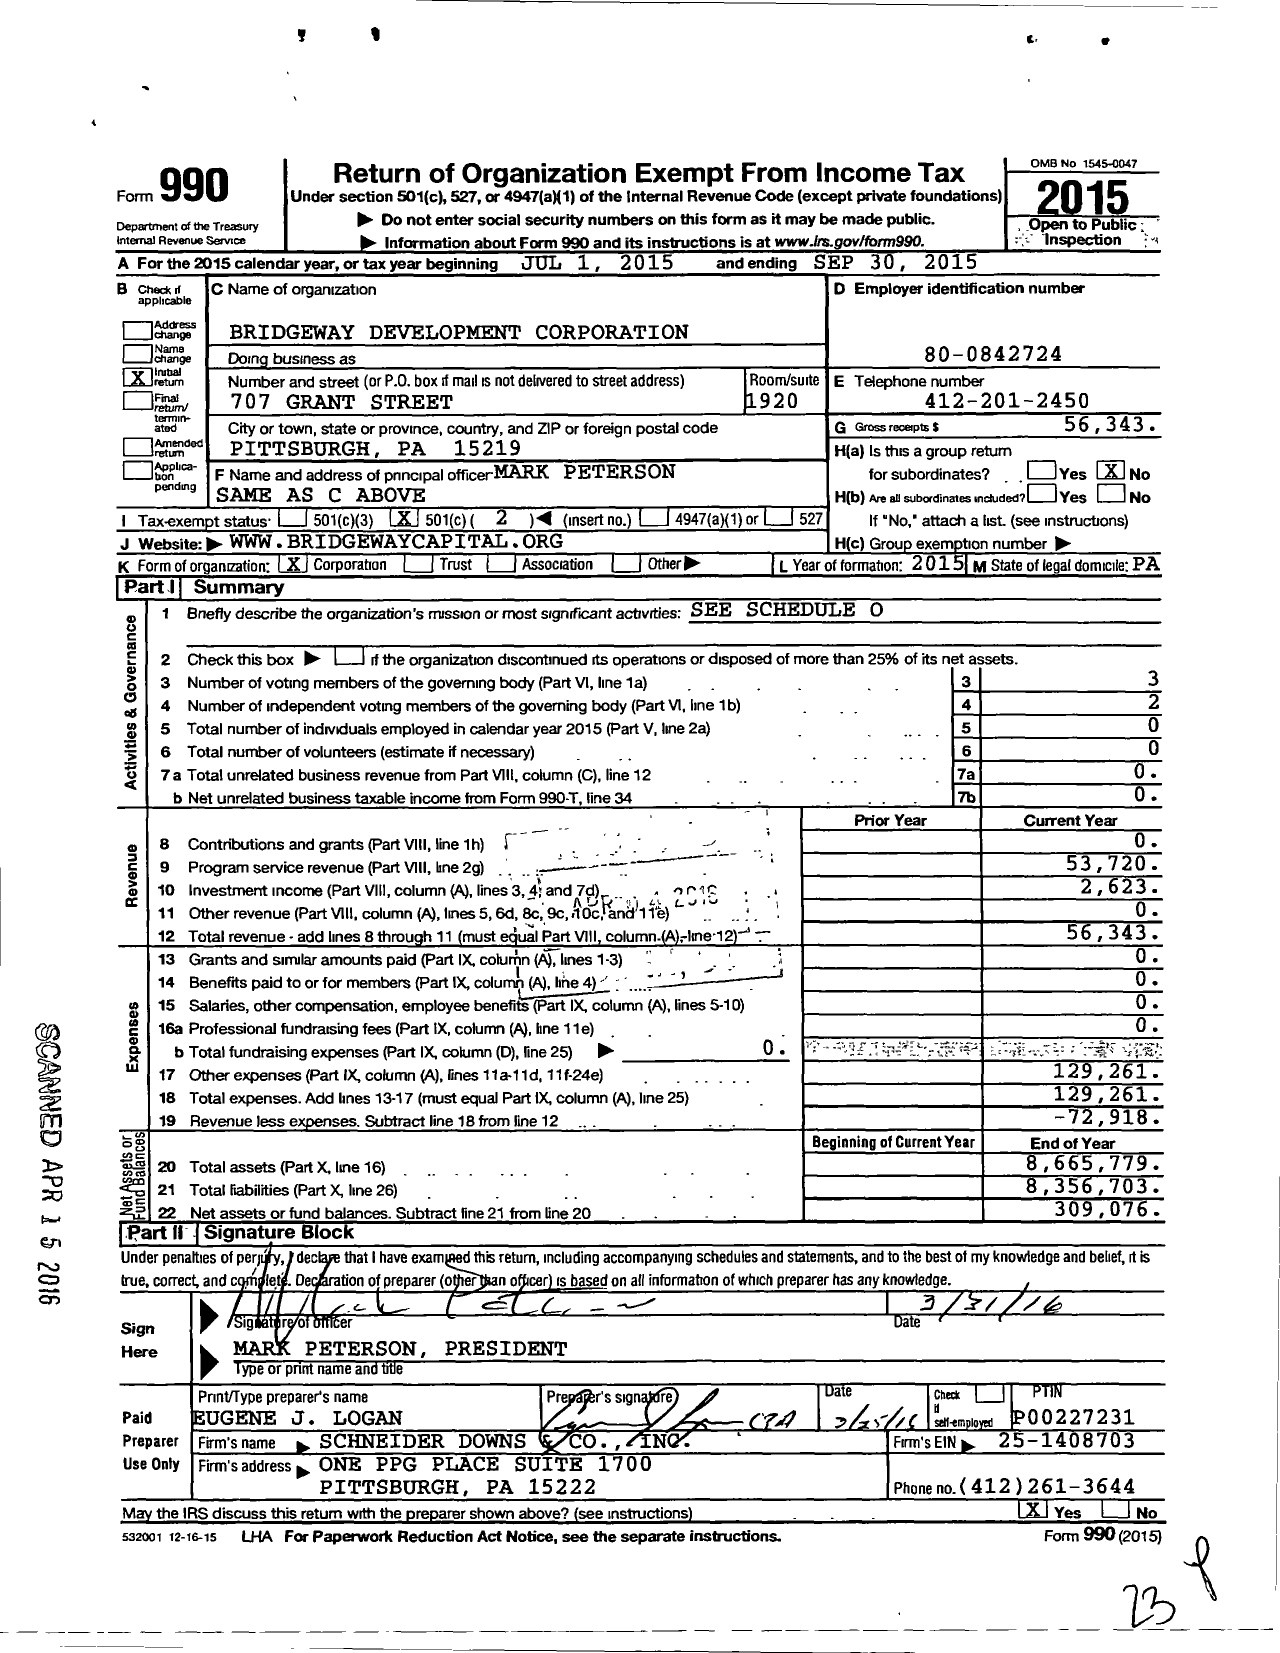 Image of first page of 2014 Form 990O for Bridgeway Development Corporation